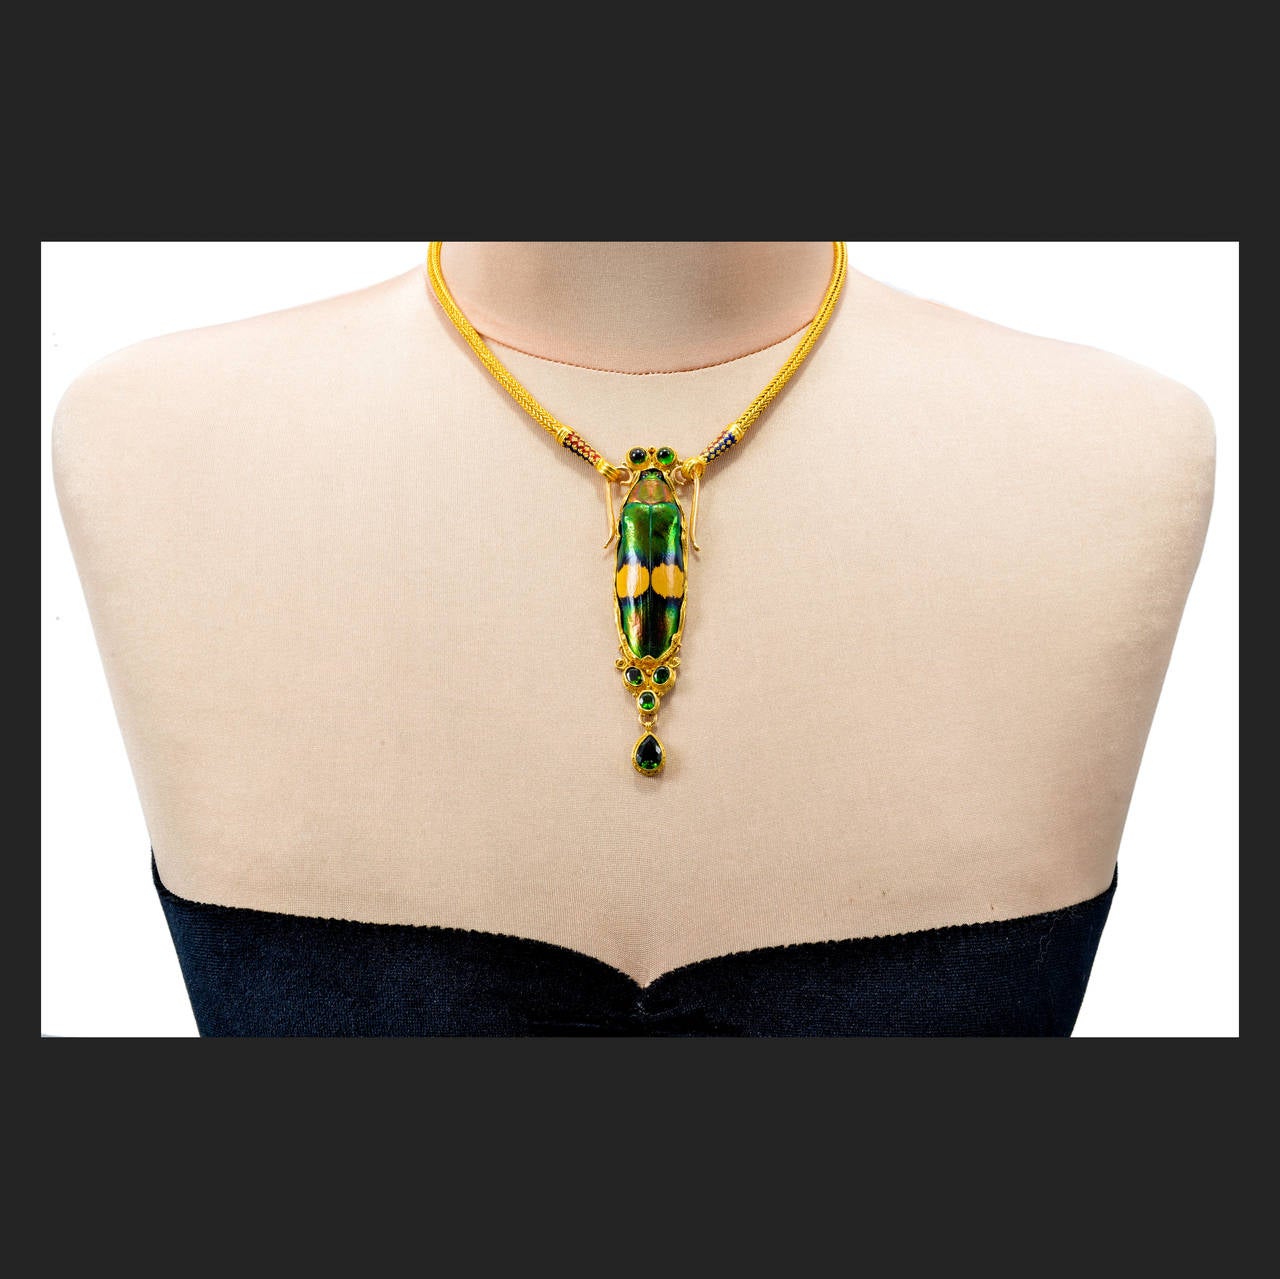 Totally handmade rare Scarab and Tourmaline necklace from the famous goldsmith Luna Felix. Large shiny green Scarab and gem green Tourmalines. Fine granulated all around. At the top on each side is a hook to attach to a chain or pearls with a loop